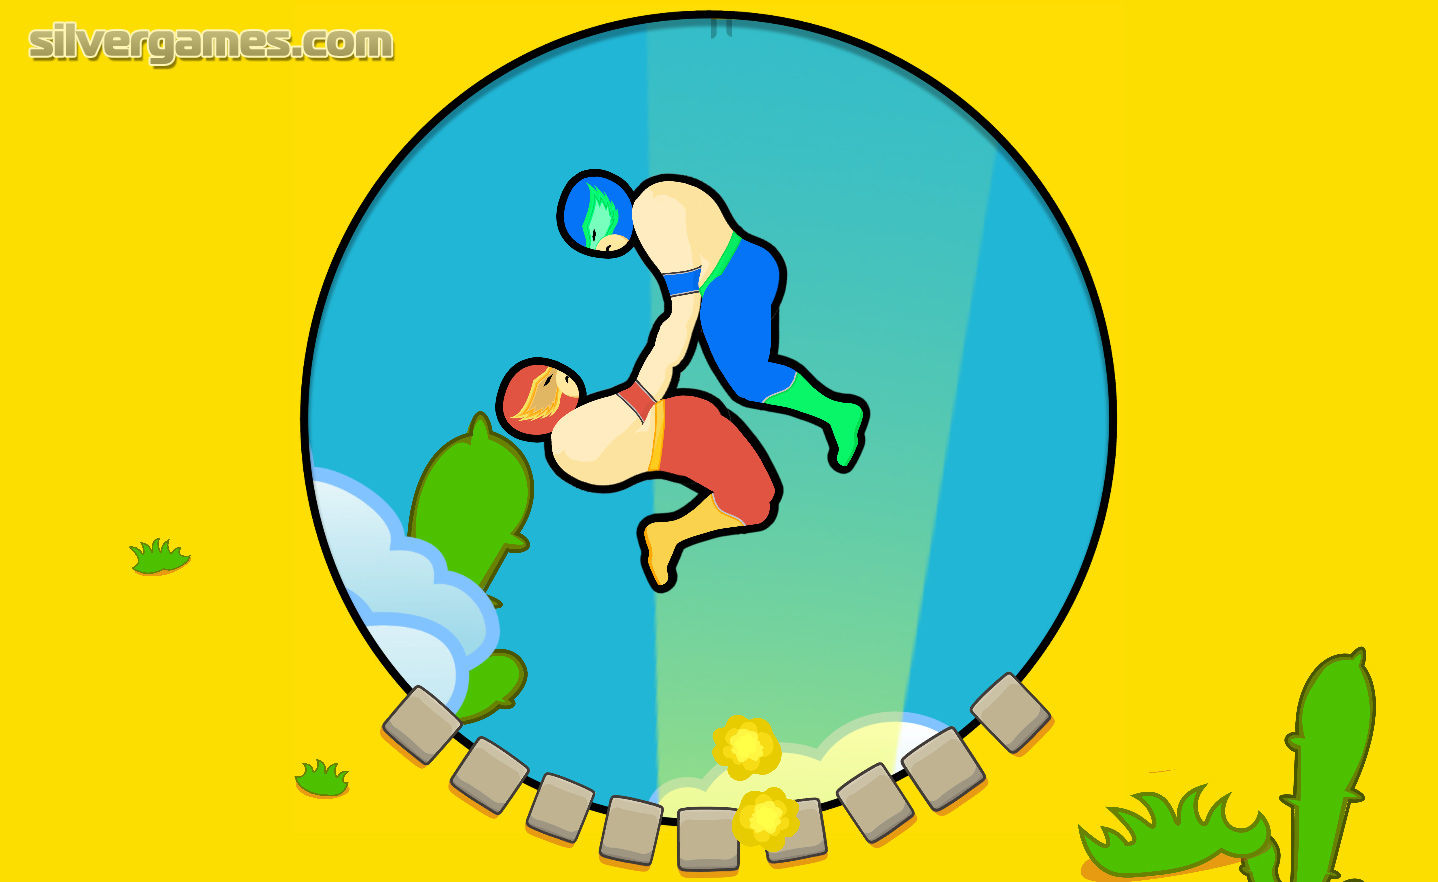 Play Wrestle Jump  Free Online Games. KidzSearch.com